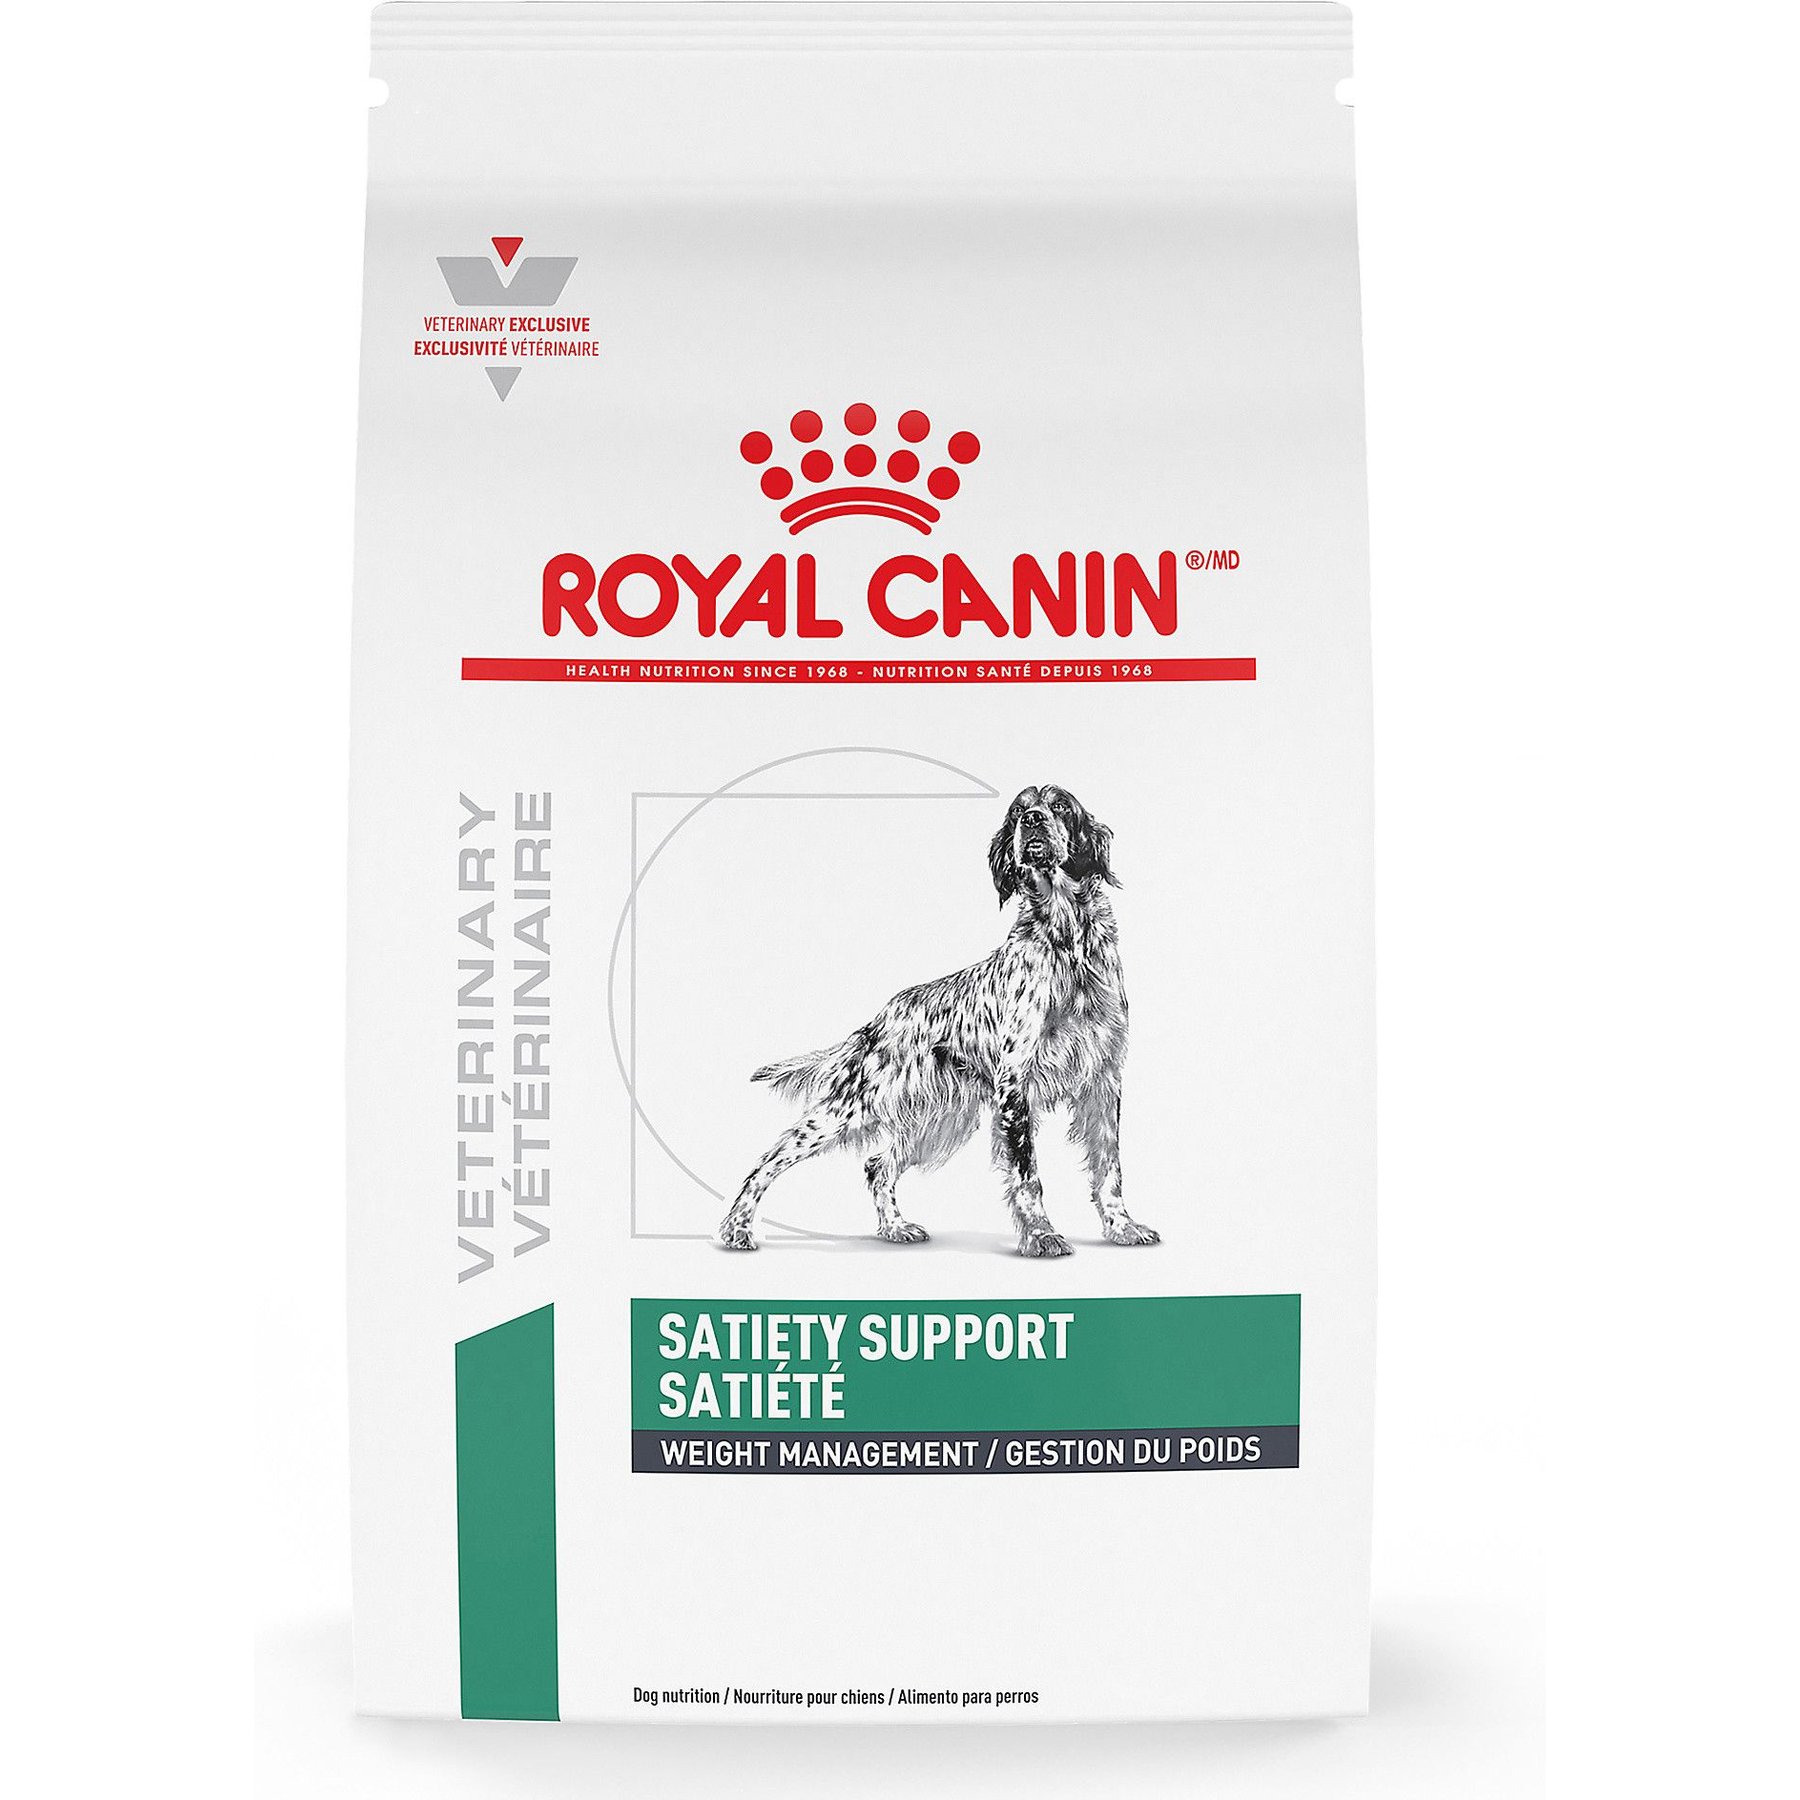 Royal Canin Veterinary Diets Croquettes Vet Care Satiety Balance